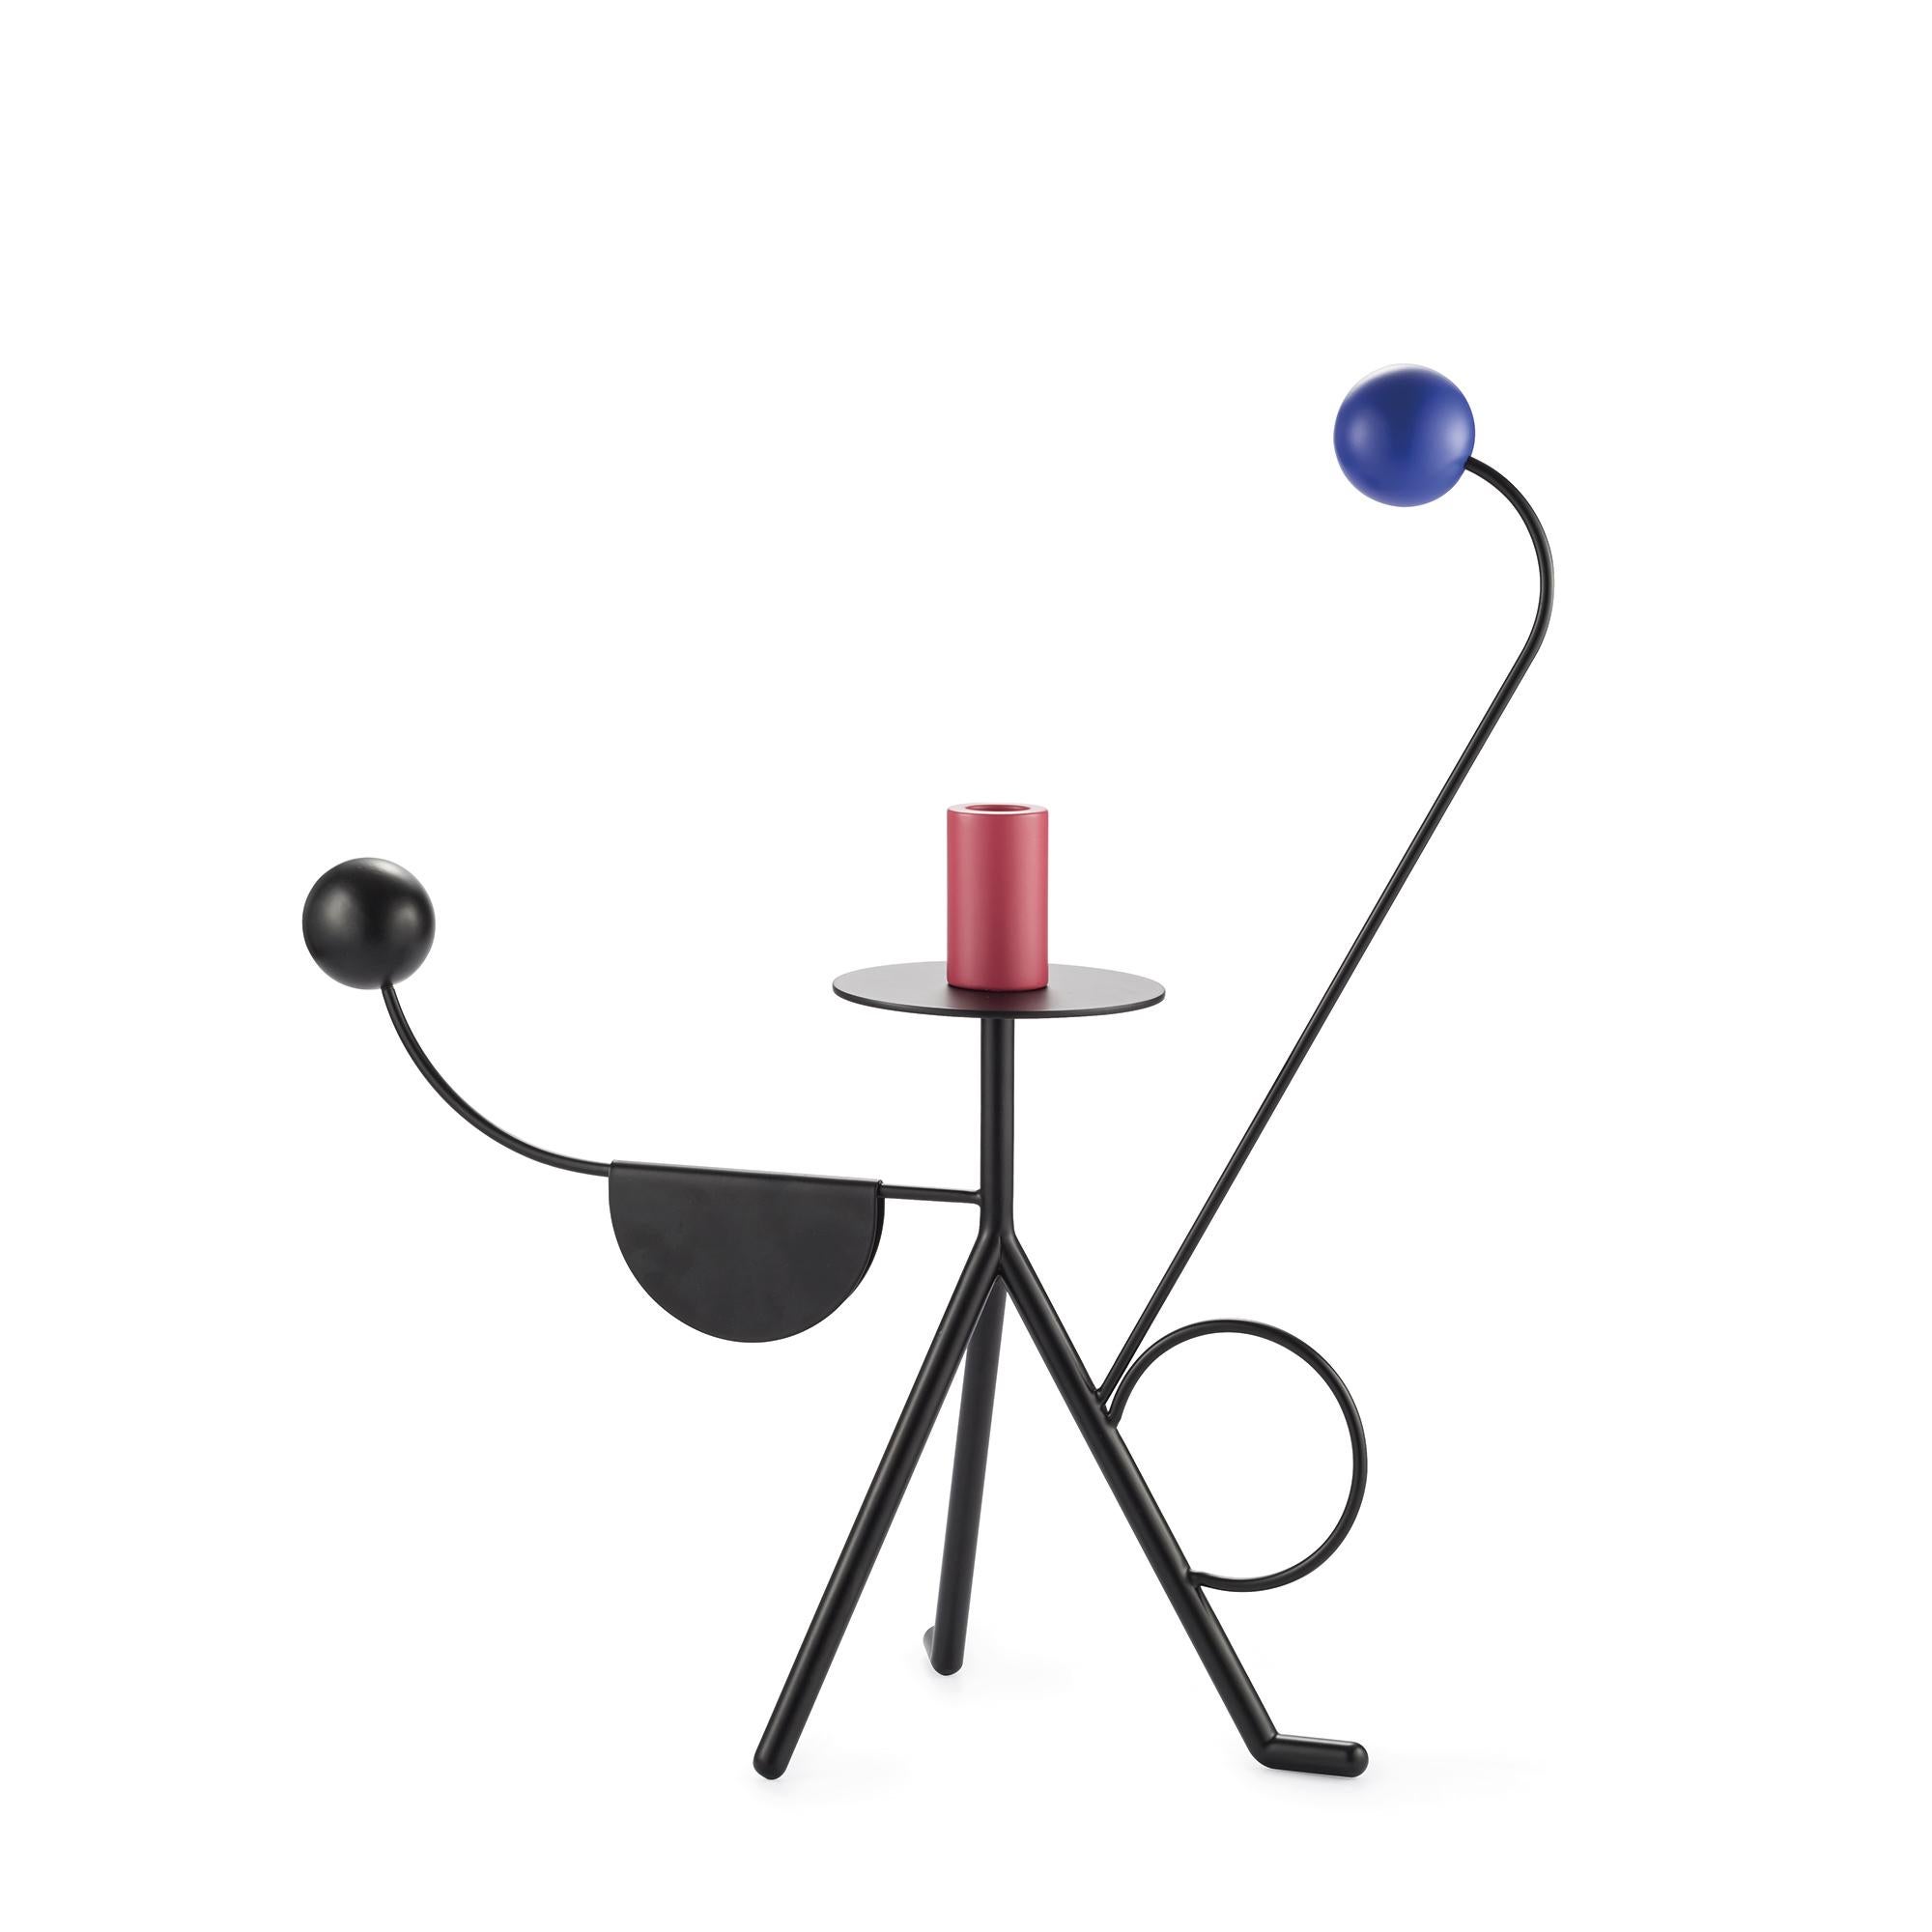 Les Immobiles N°3 candleholder by Thomas Dariel
Dimensions: D 44.3 x W 20.5 x H 48.2 cm 
Materials: Black, Blue, and Red powder-coated metal. Color: Multicolored.
Also available in other dimensions. 


Whimsical, abstract, and refined, Les